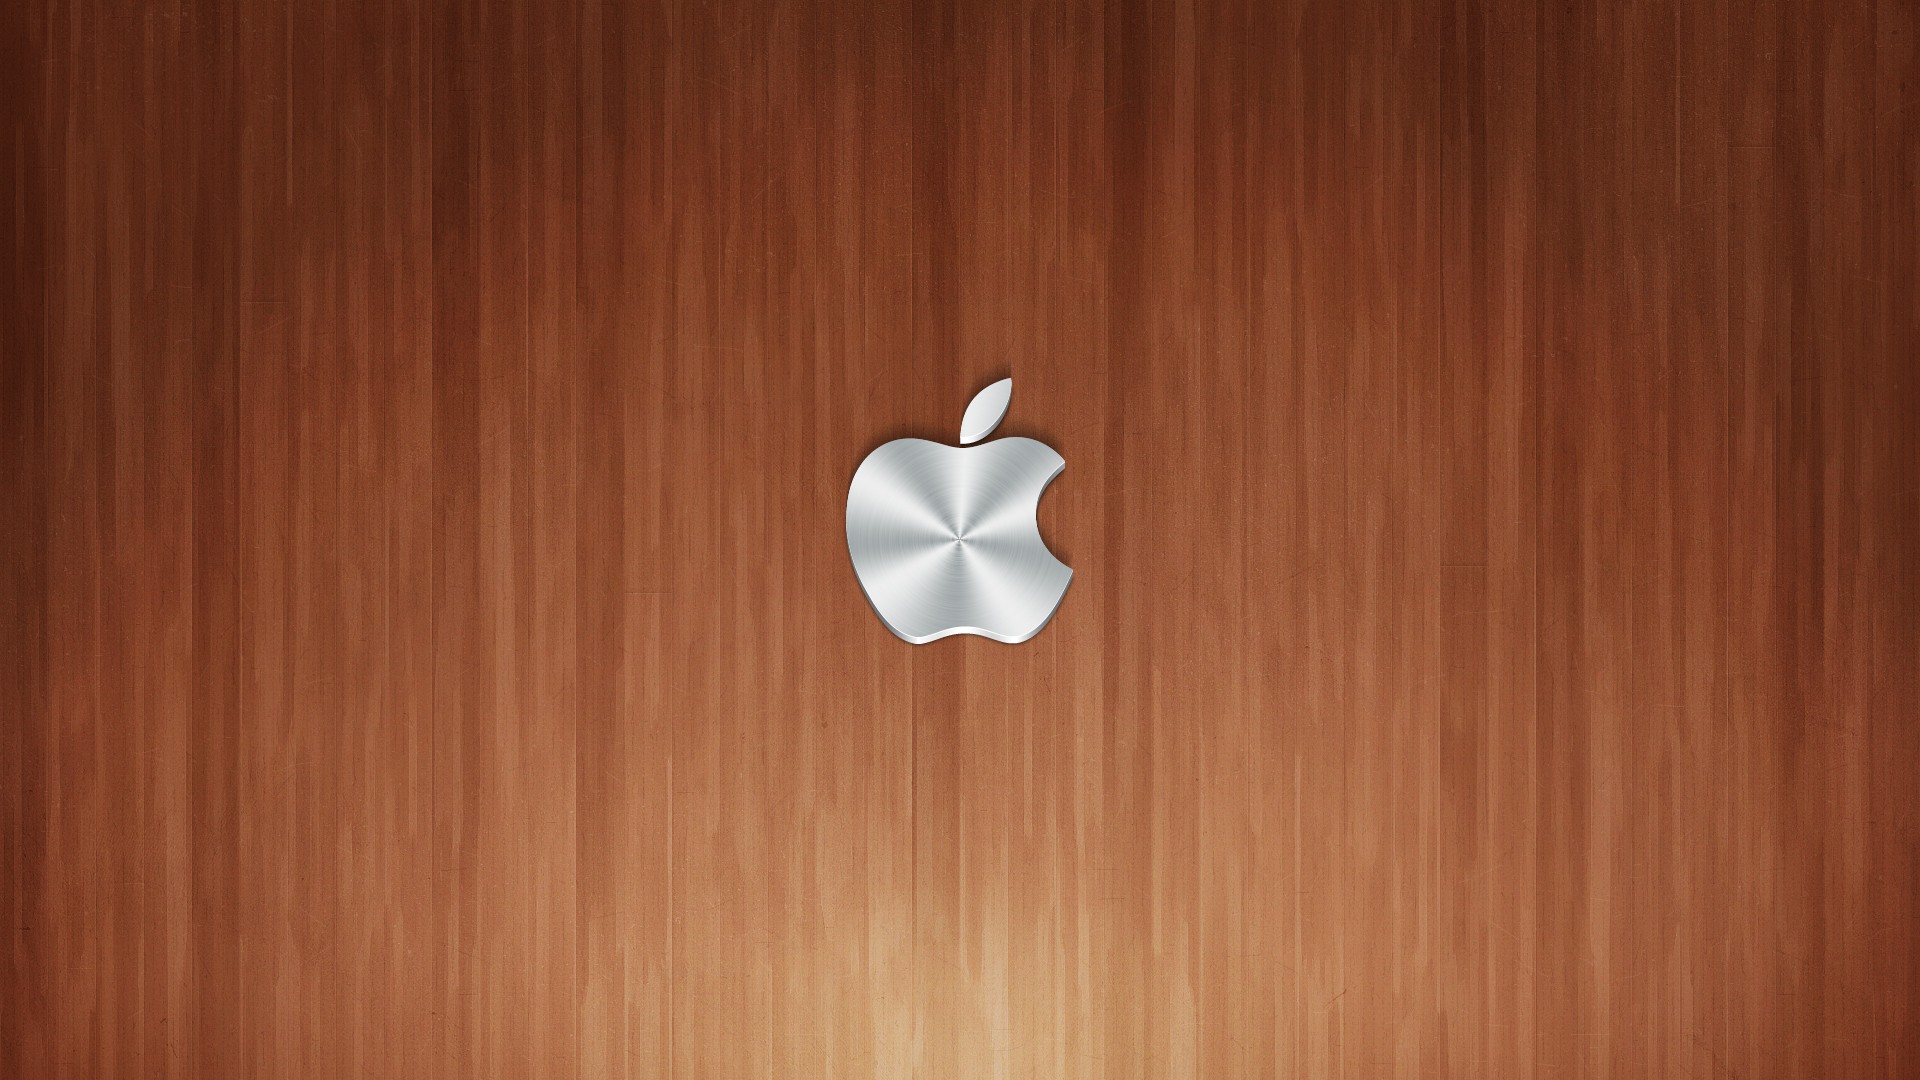 Apple Inc Logos Best Widescreen Background Awesome B84f